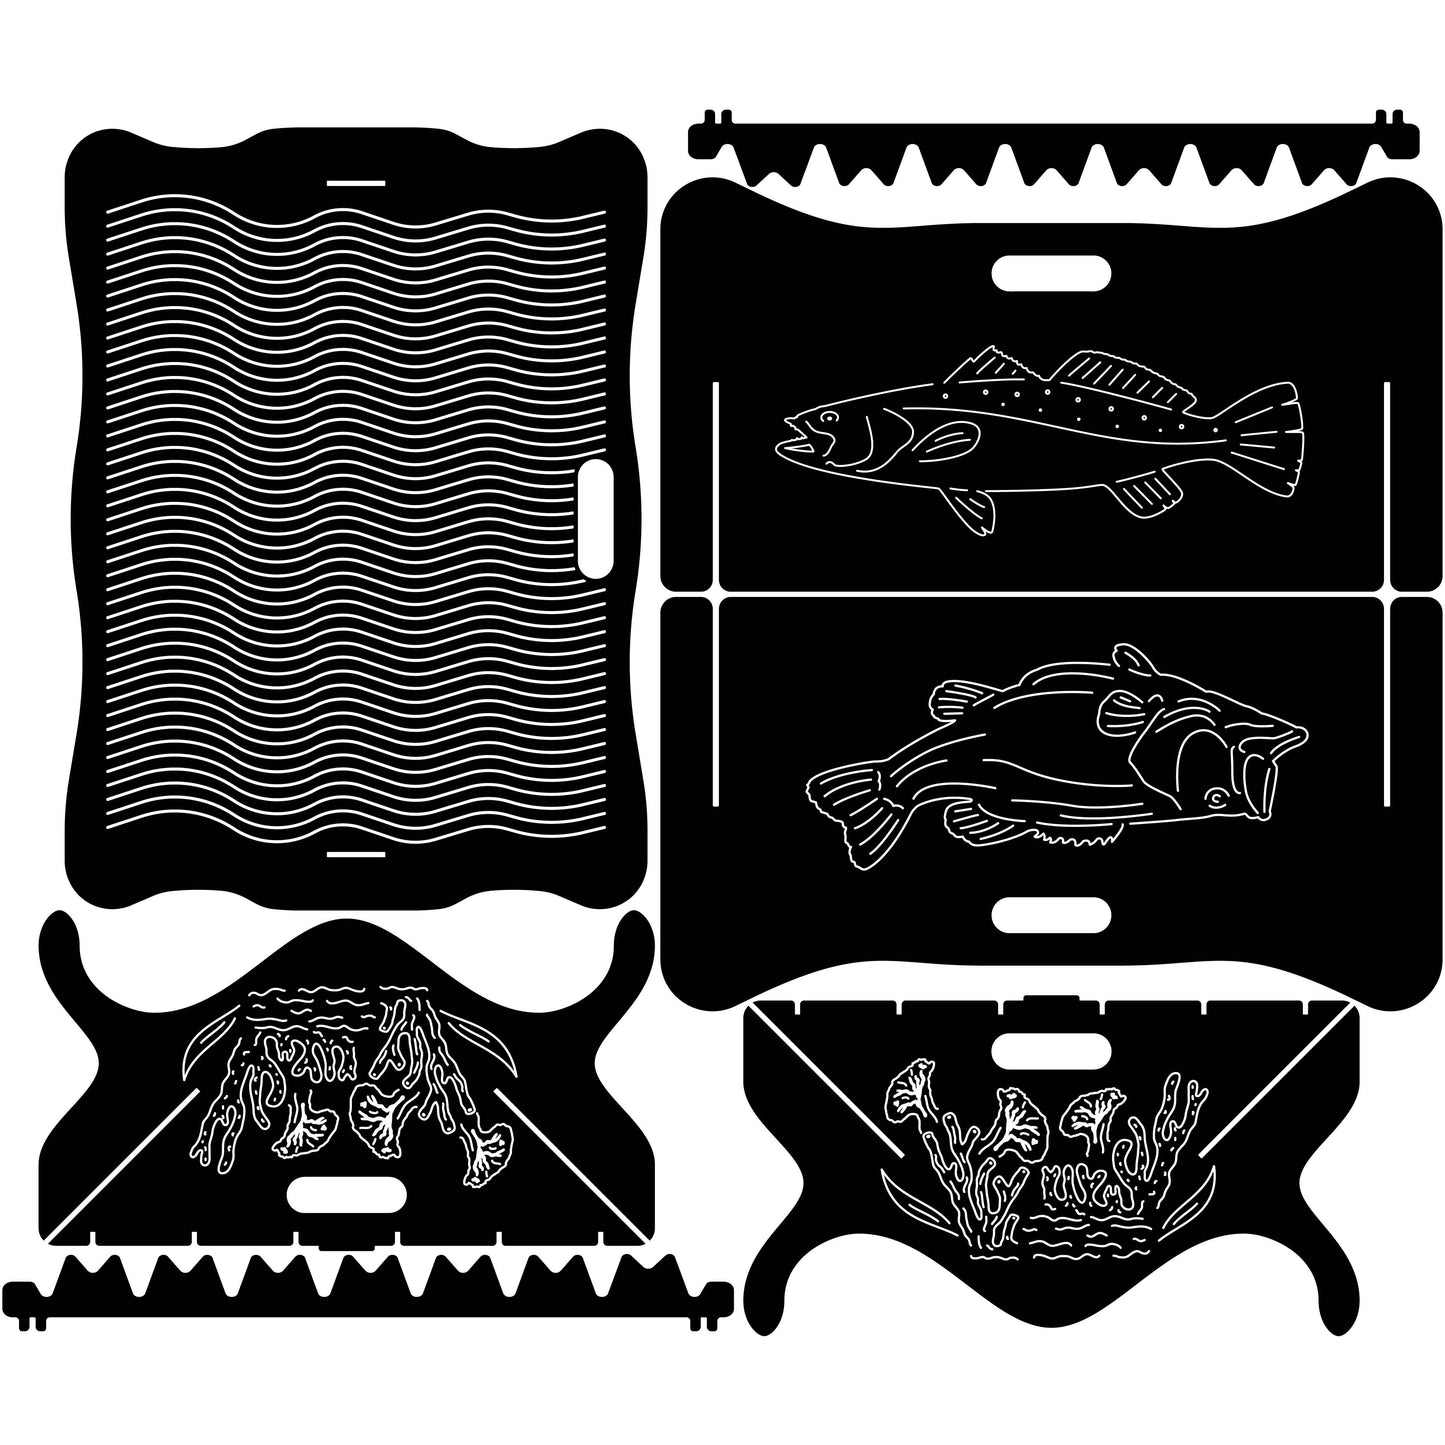 Fire Pit Collapsible Trout and Bass Fishes-dxf files cut ready for cnc